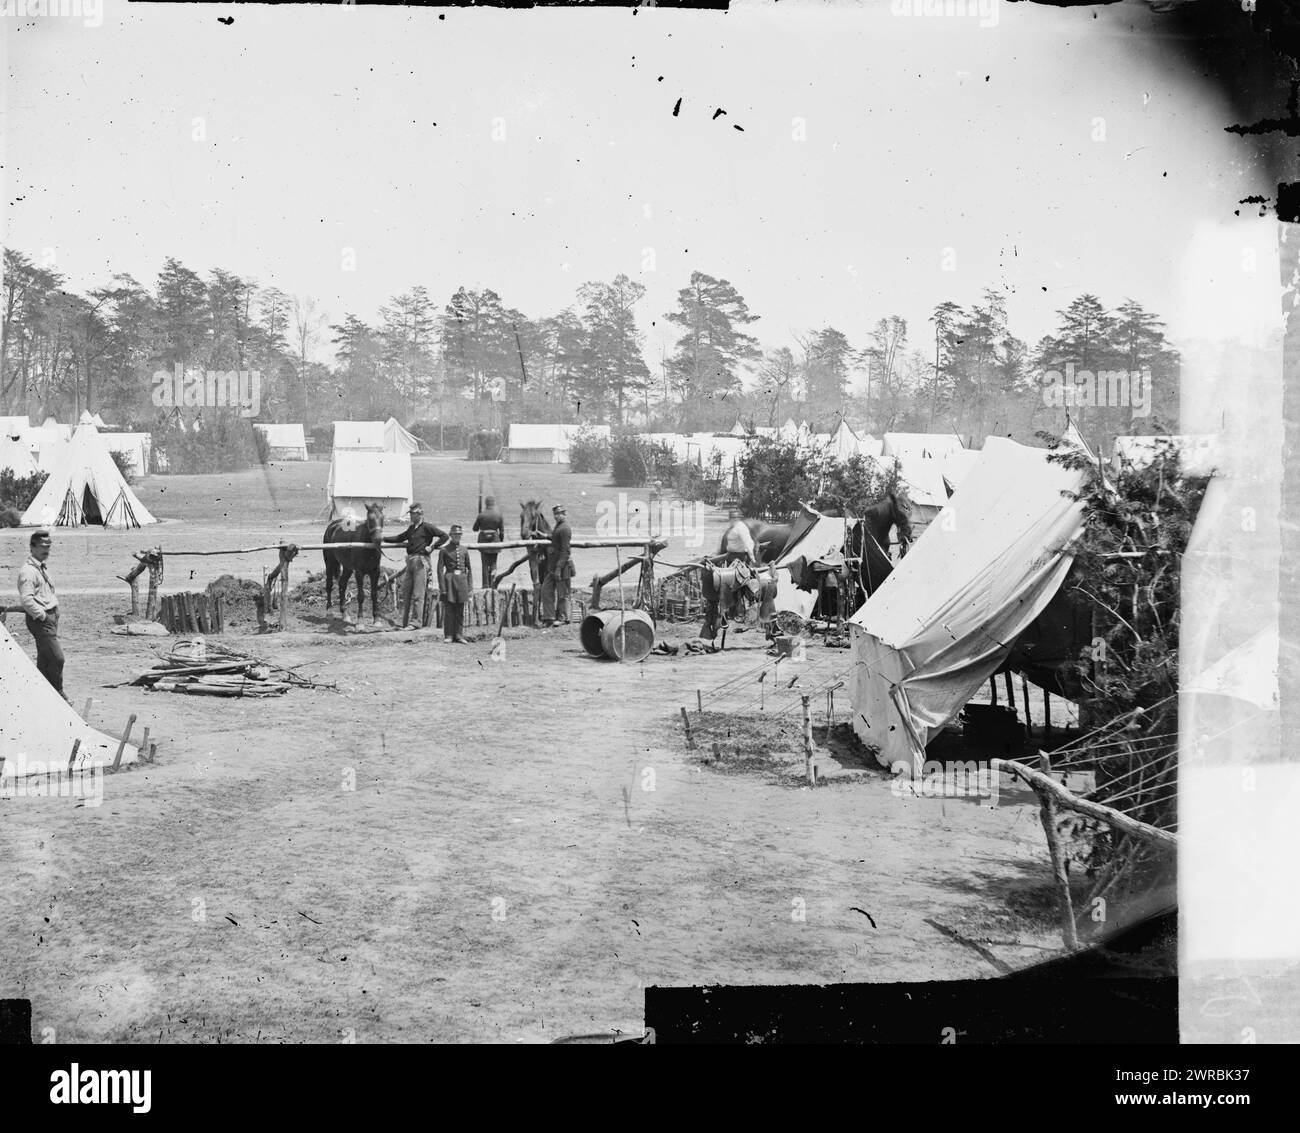 Yorktown, Va., vicinity. Headquarters of Gen. George B. McClellan, Camp Winfield Scott, Photograph from the main eastern theater of war, the Peninsular Campaign, May-August 1862., Gibson, James F., 1828-, photographer, 1862 May 3., United States, History, Civil War, 1861-1865, Stereographs, 1860-1870., Stereographs, 1860-1870, Wet collodion negatives, 1 negative: glass, stereograph, wet collodion Stock Photo